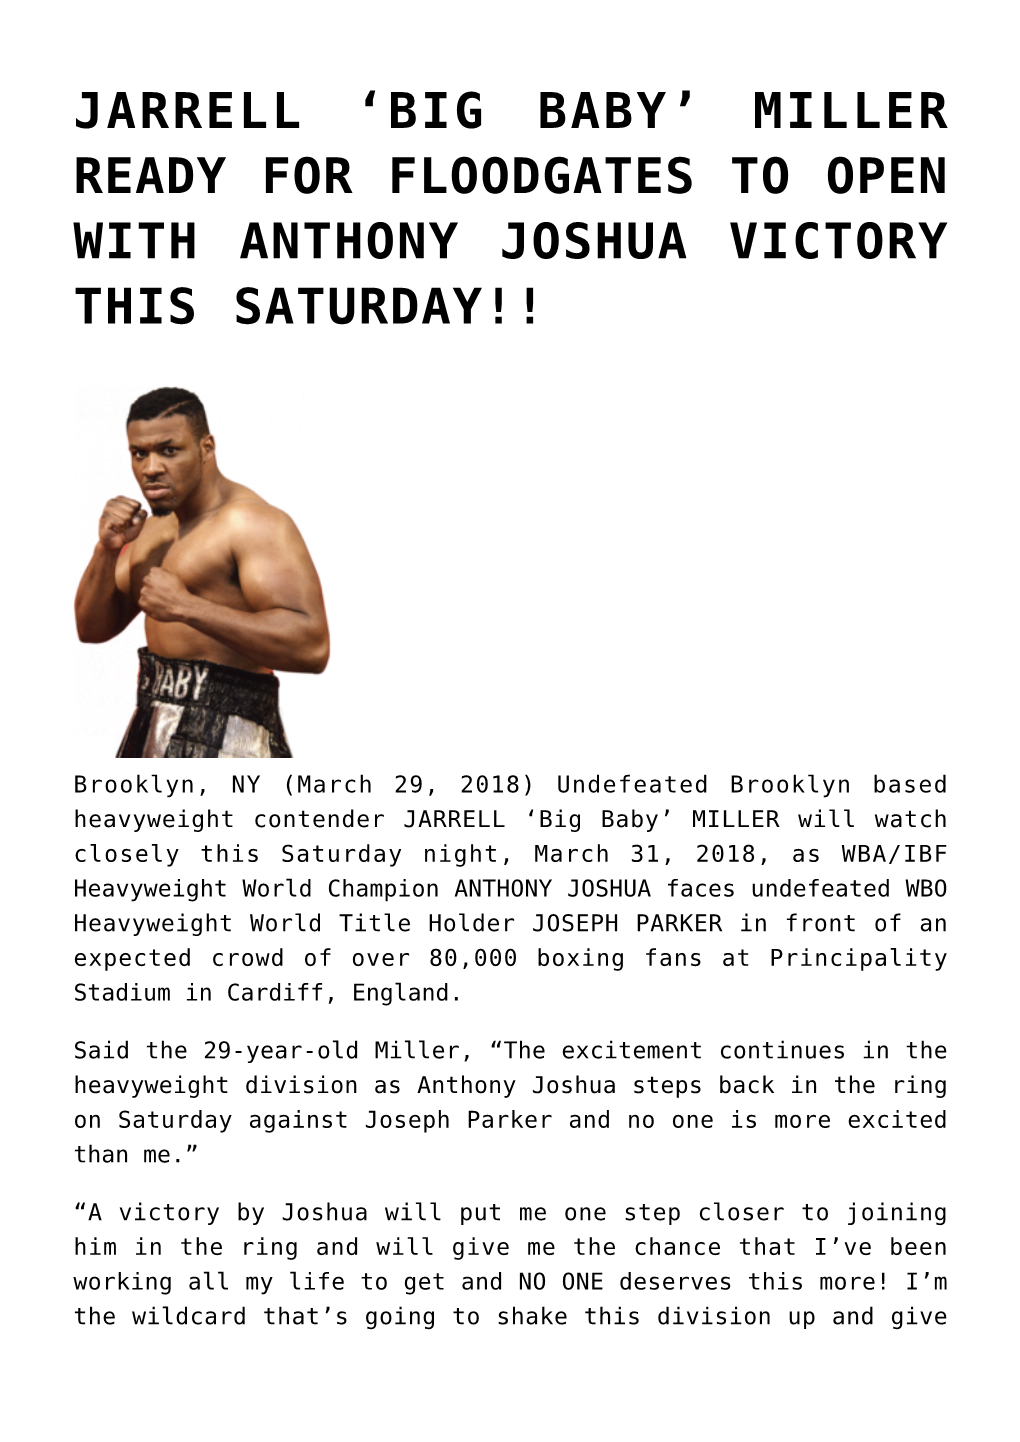 Jarrell 'Big Baby' Miller Ready for Floodgates to Open with Anthony Joshua Victory This Saturday!!